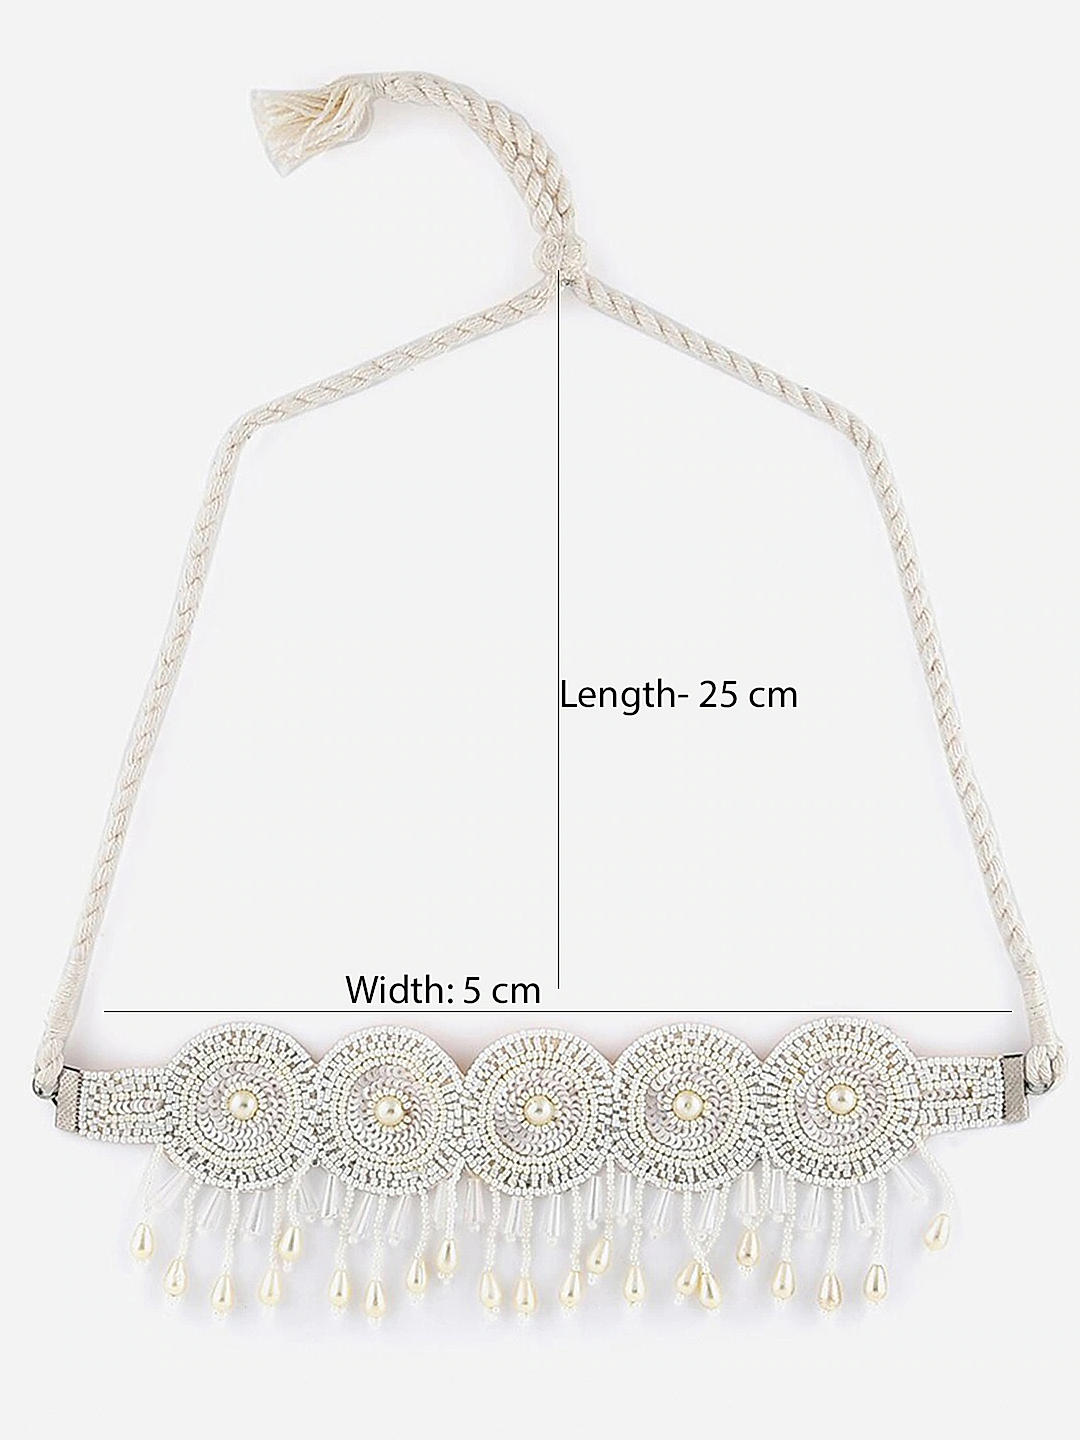 Vidrana White Pearl Choker Necklace Pearl Mother of Pearl Necklace Price in  India - Buy Vidrana White Pearl Choker Necklace Pearl Mother of Pearl  Necklace Online at Best Prices in India